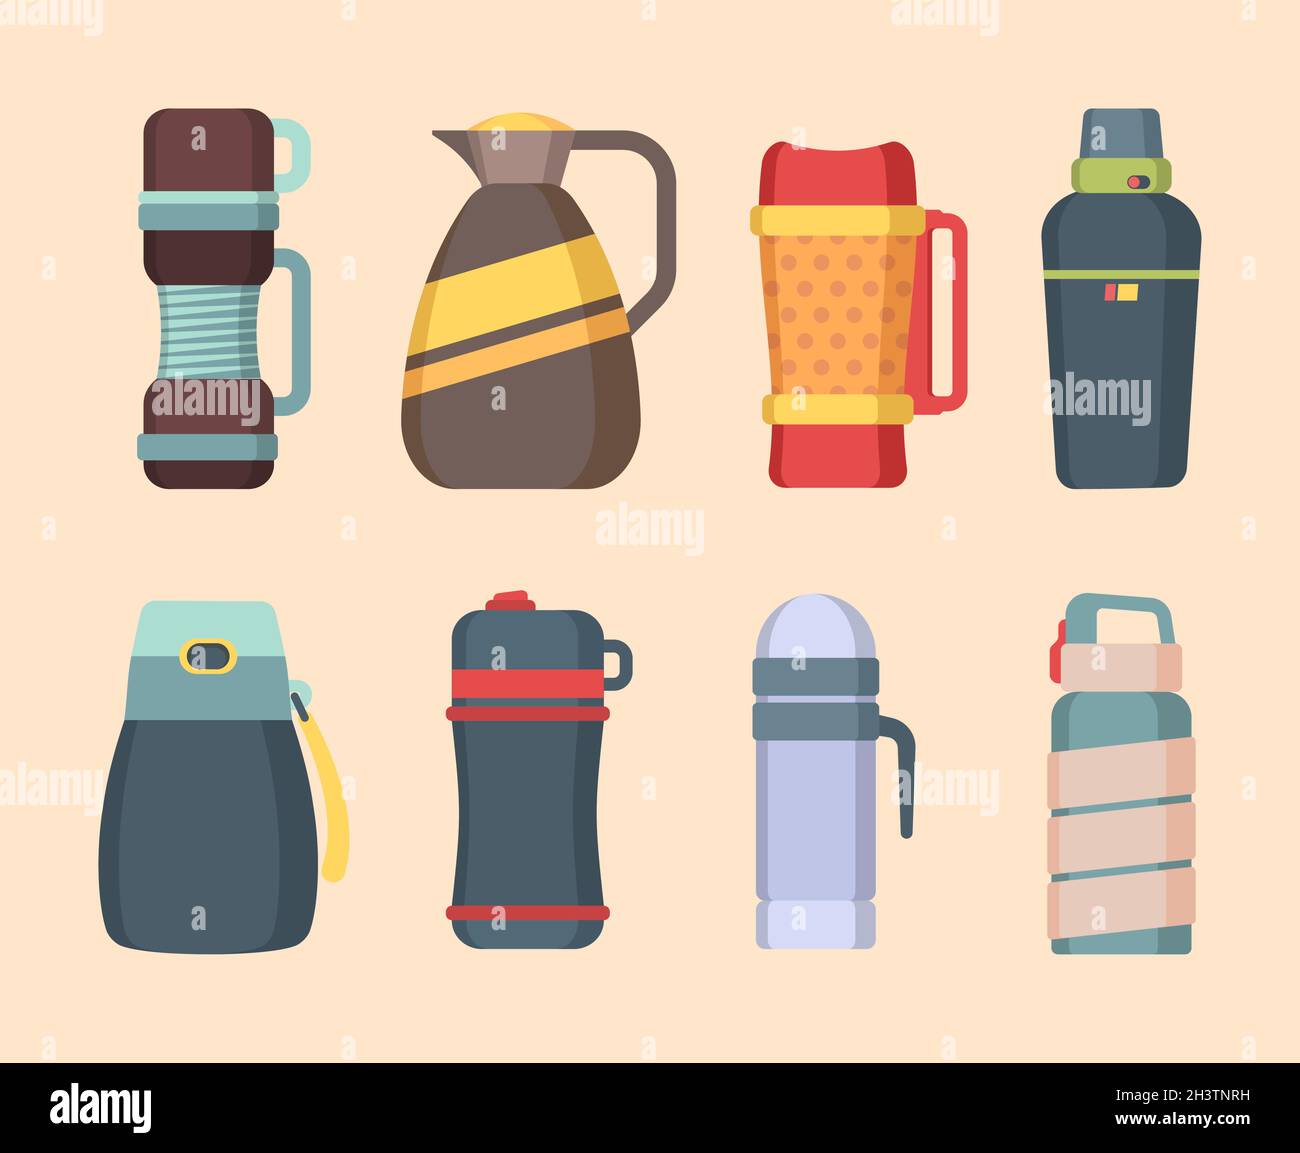 https://c8.alamy.com/comp/2H3TNRH/vacuum-flask-steel-mug-and-thermos-for-water-or-liquids-containers-bottles-for-coffee-and-food-vector-flat-pictures-2H3TNRH.jpg